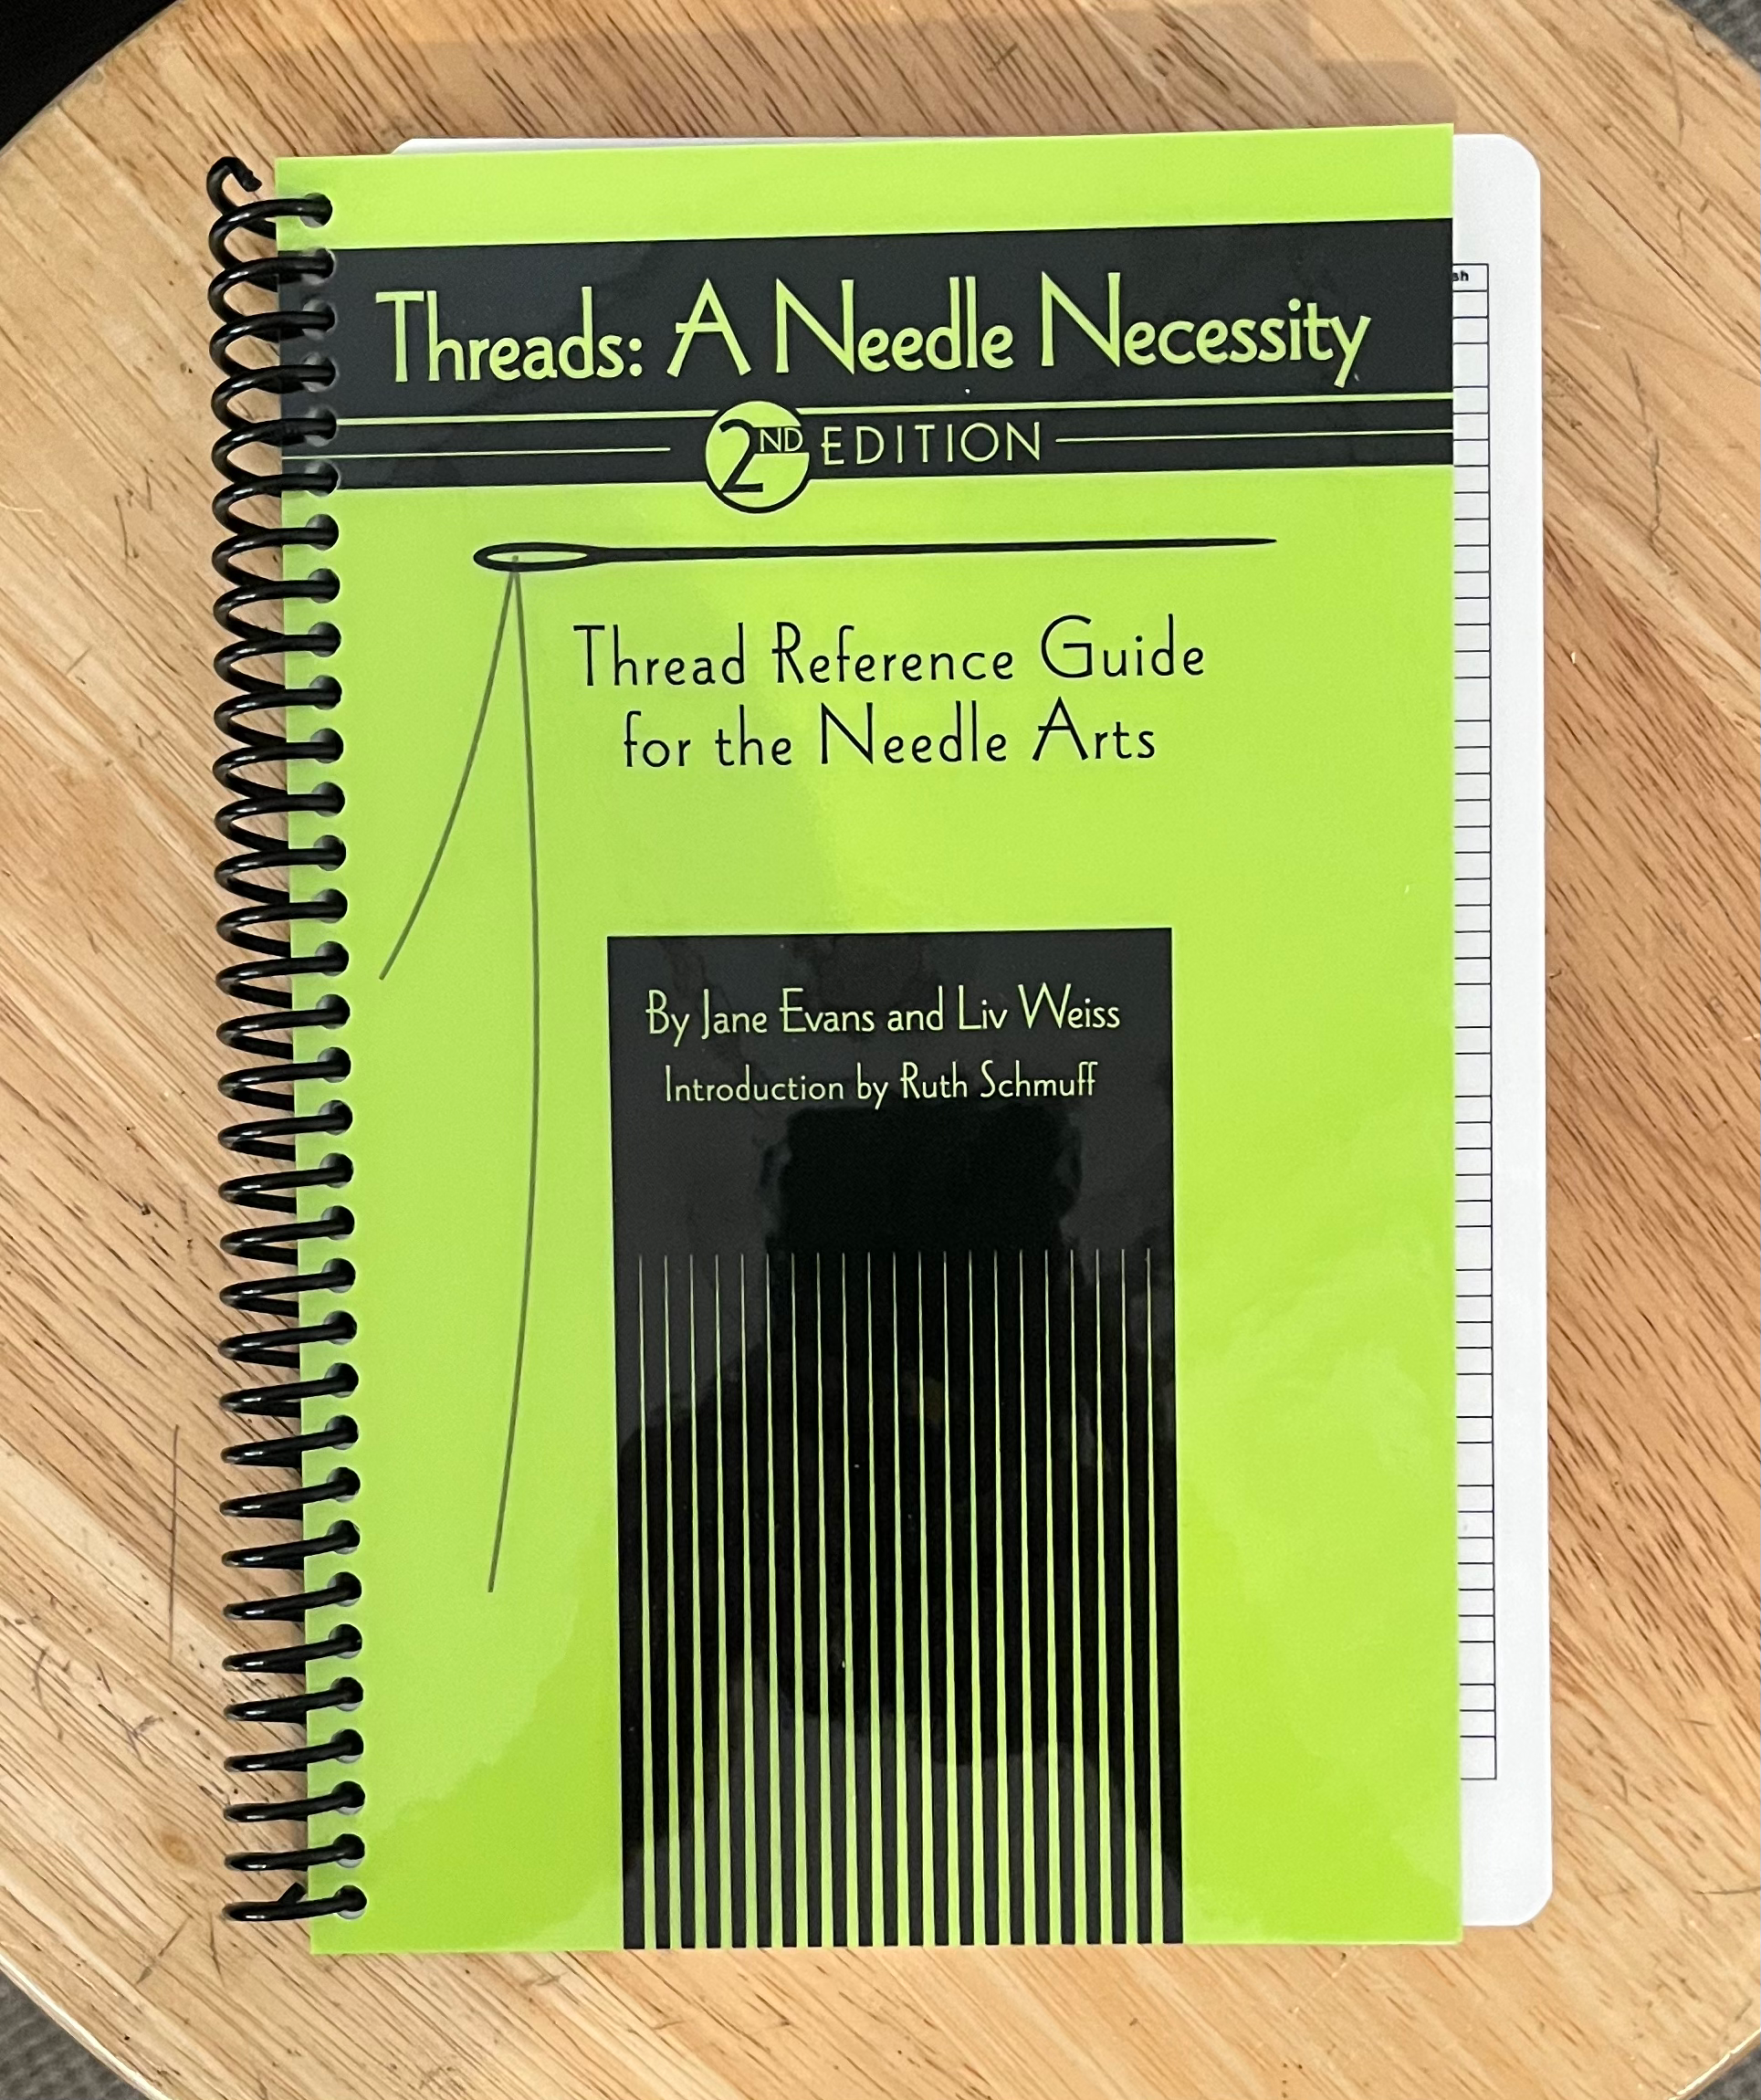 Threads: A Needle Necessity 2nd Edition